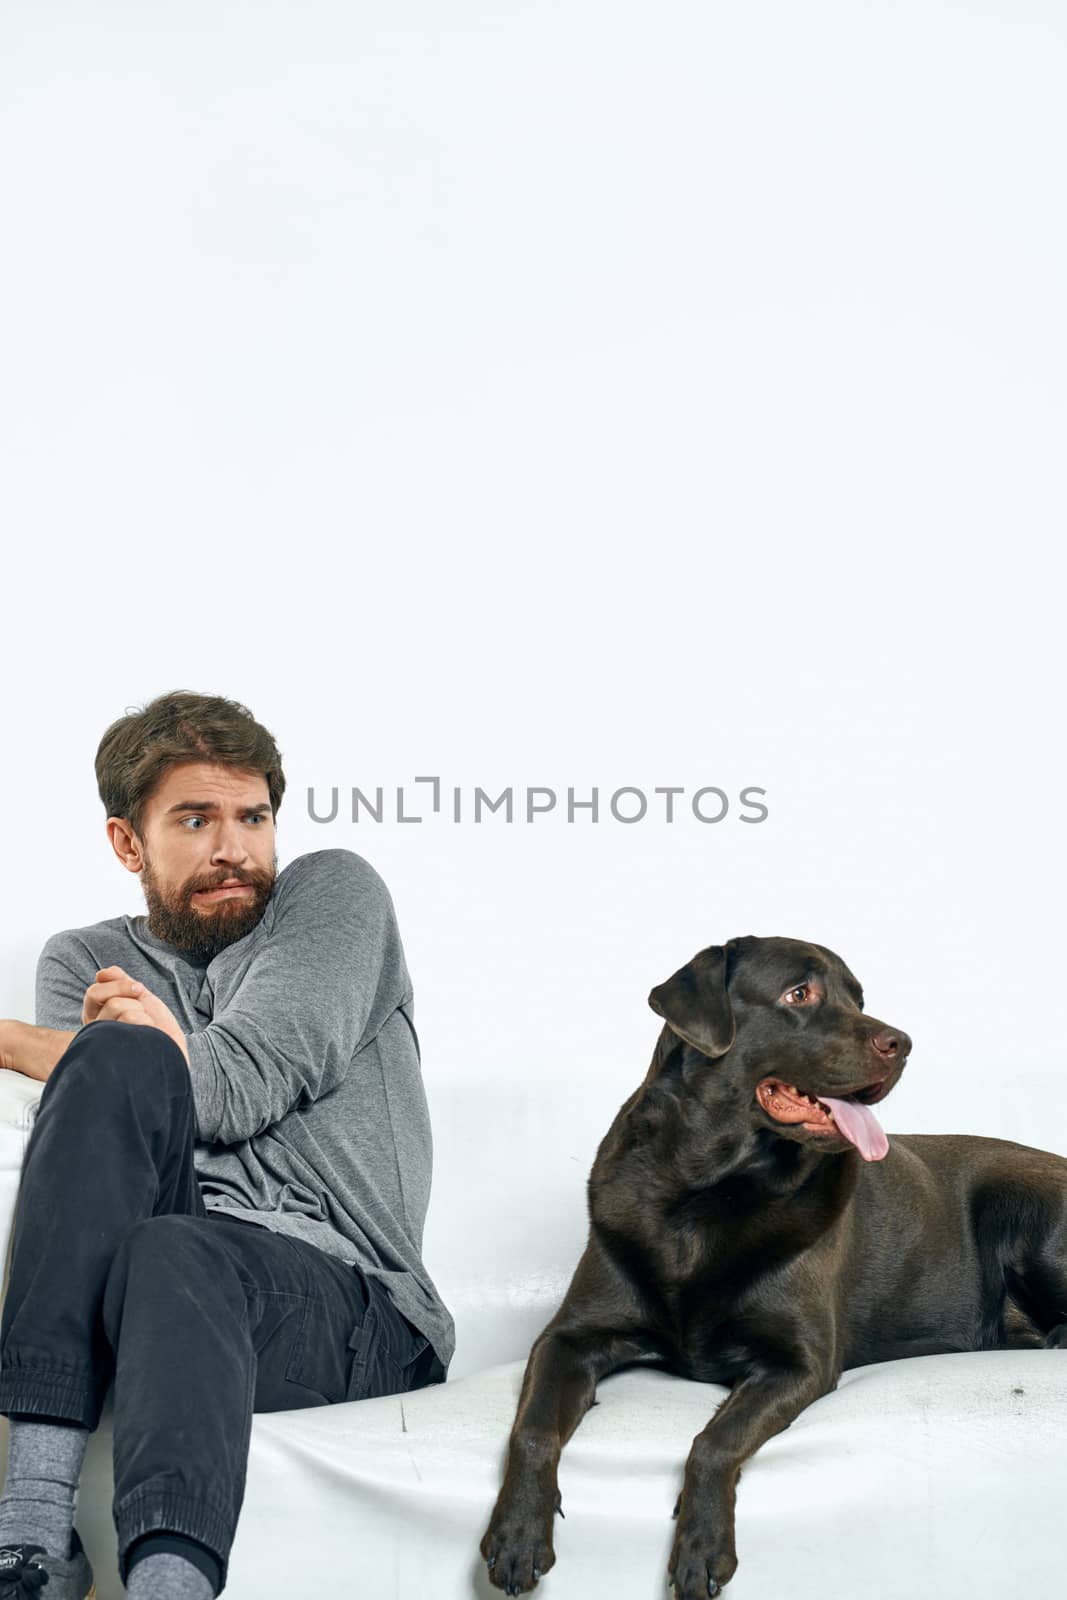 man with a black dog on a white sofa on a light background close-up cropped view pet human friend emotions fun. High quality photo